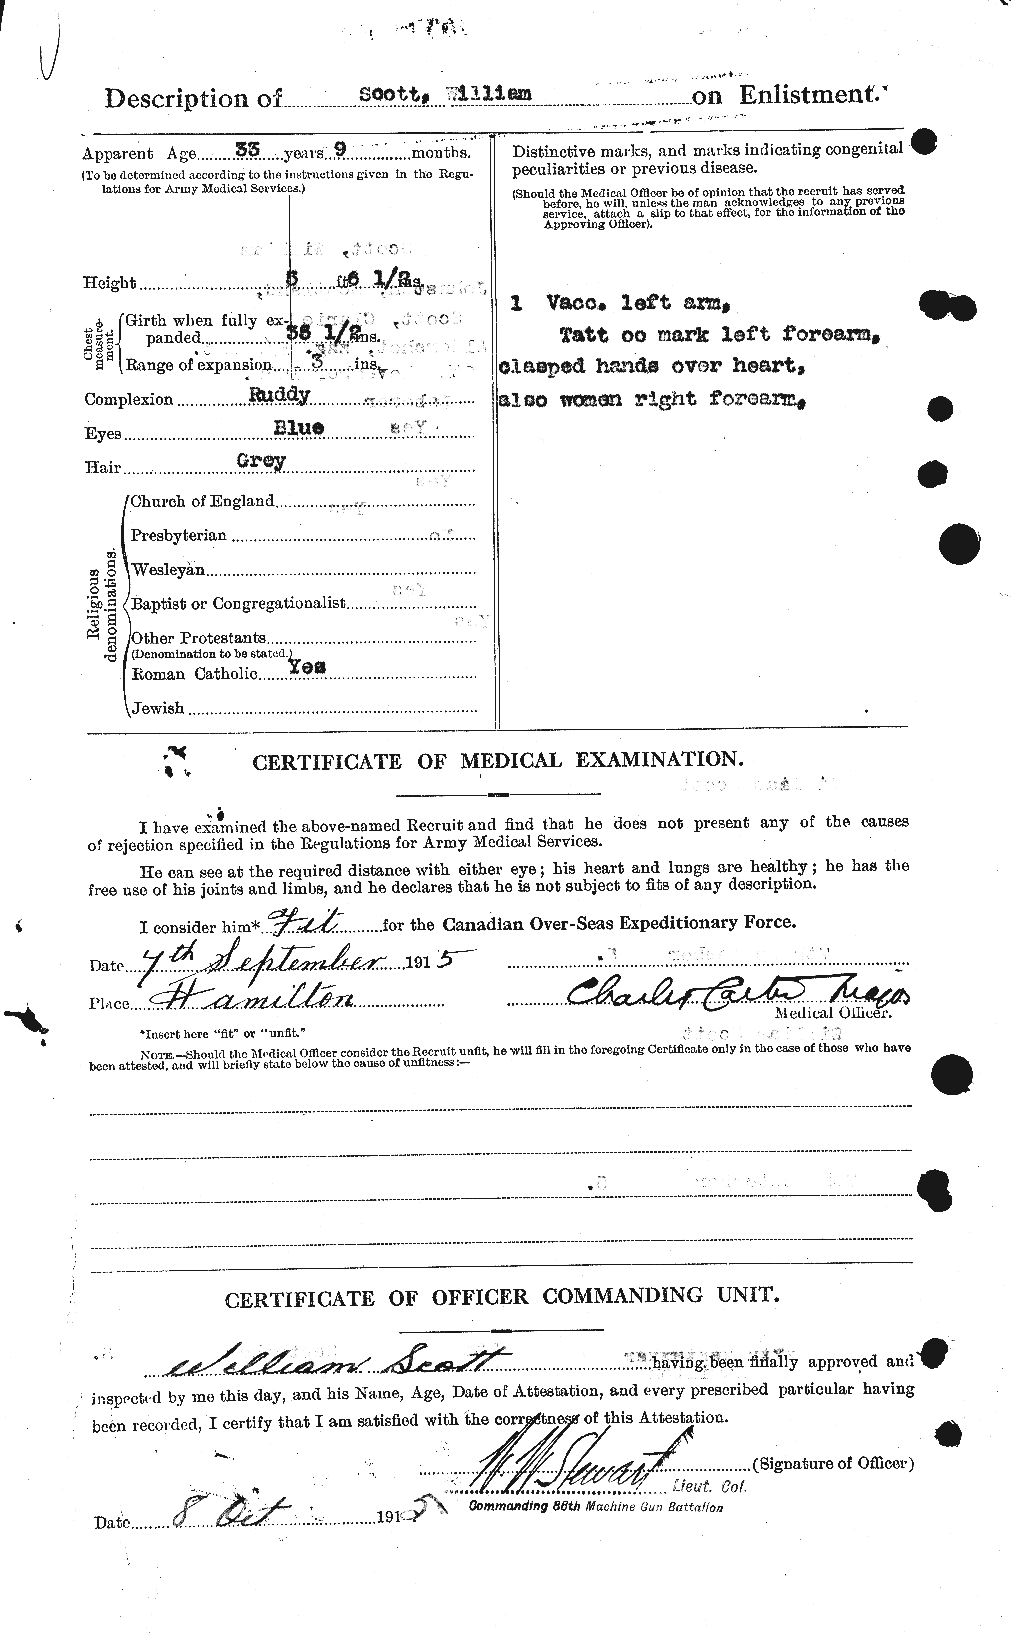 Personnel Records of the First World War - CEF 087358b